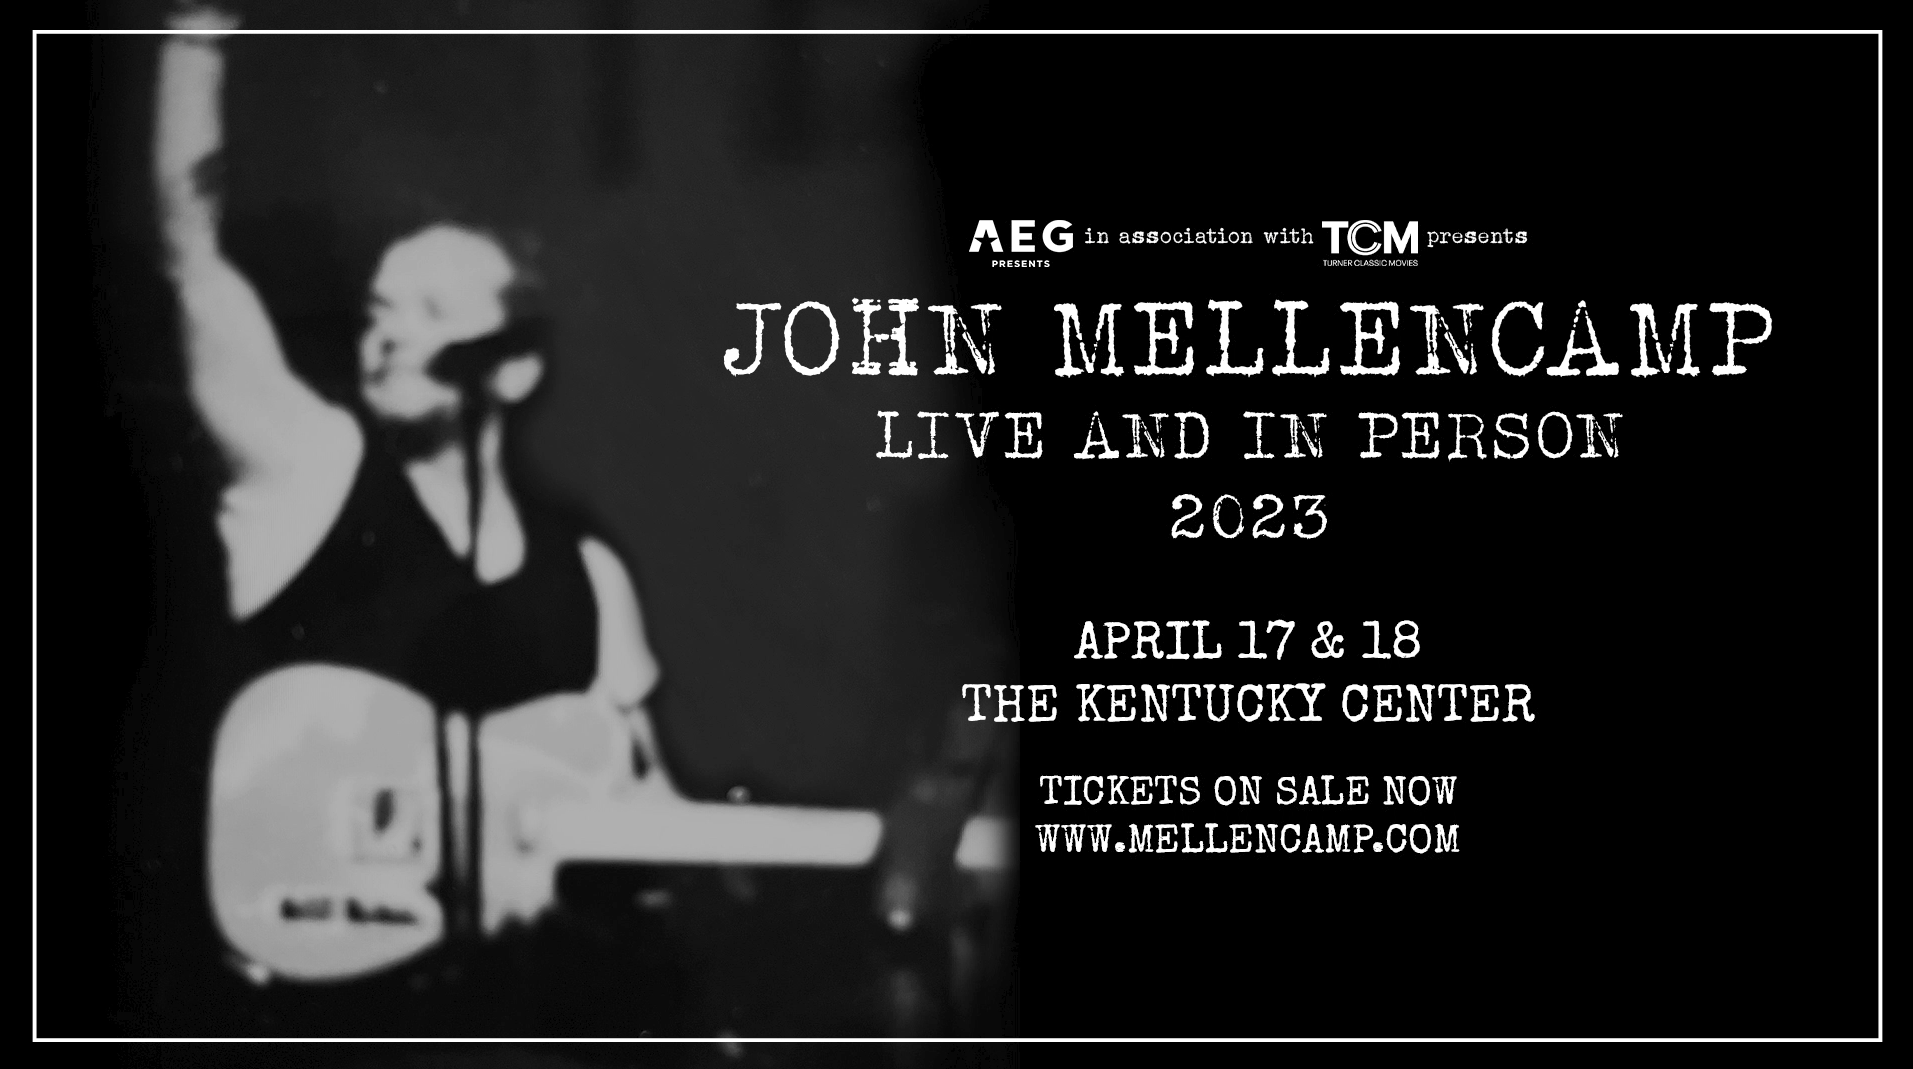 John Mellencamp Live and In Person